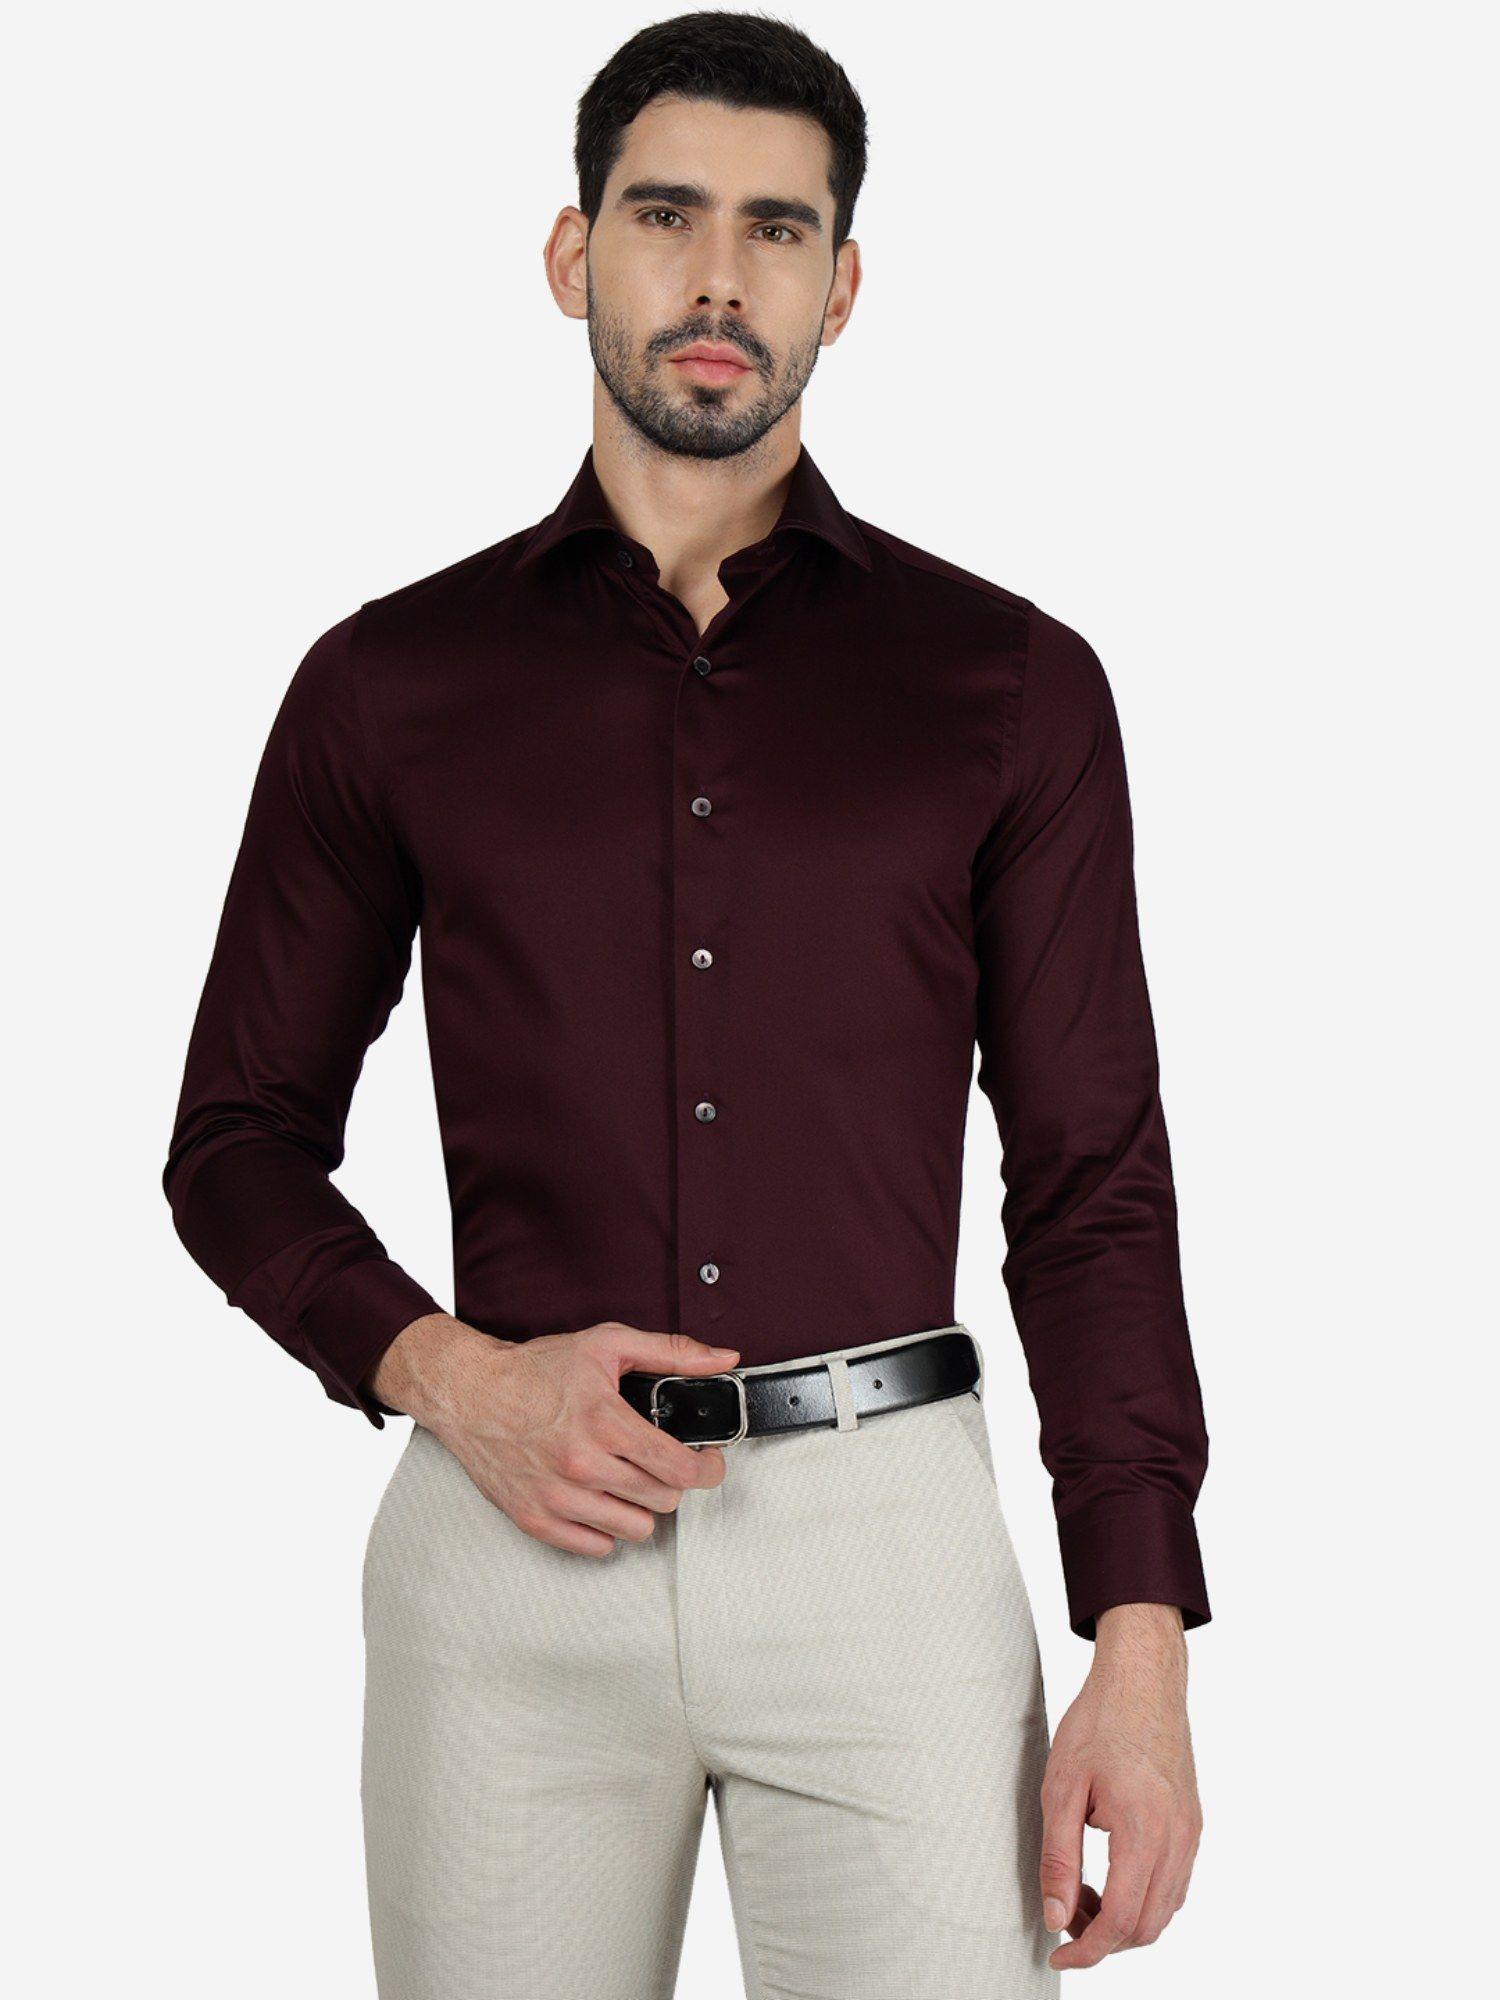 men 100% cotton solid wine slim fit full sleeve party wear shirt